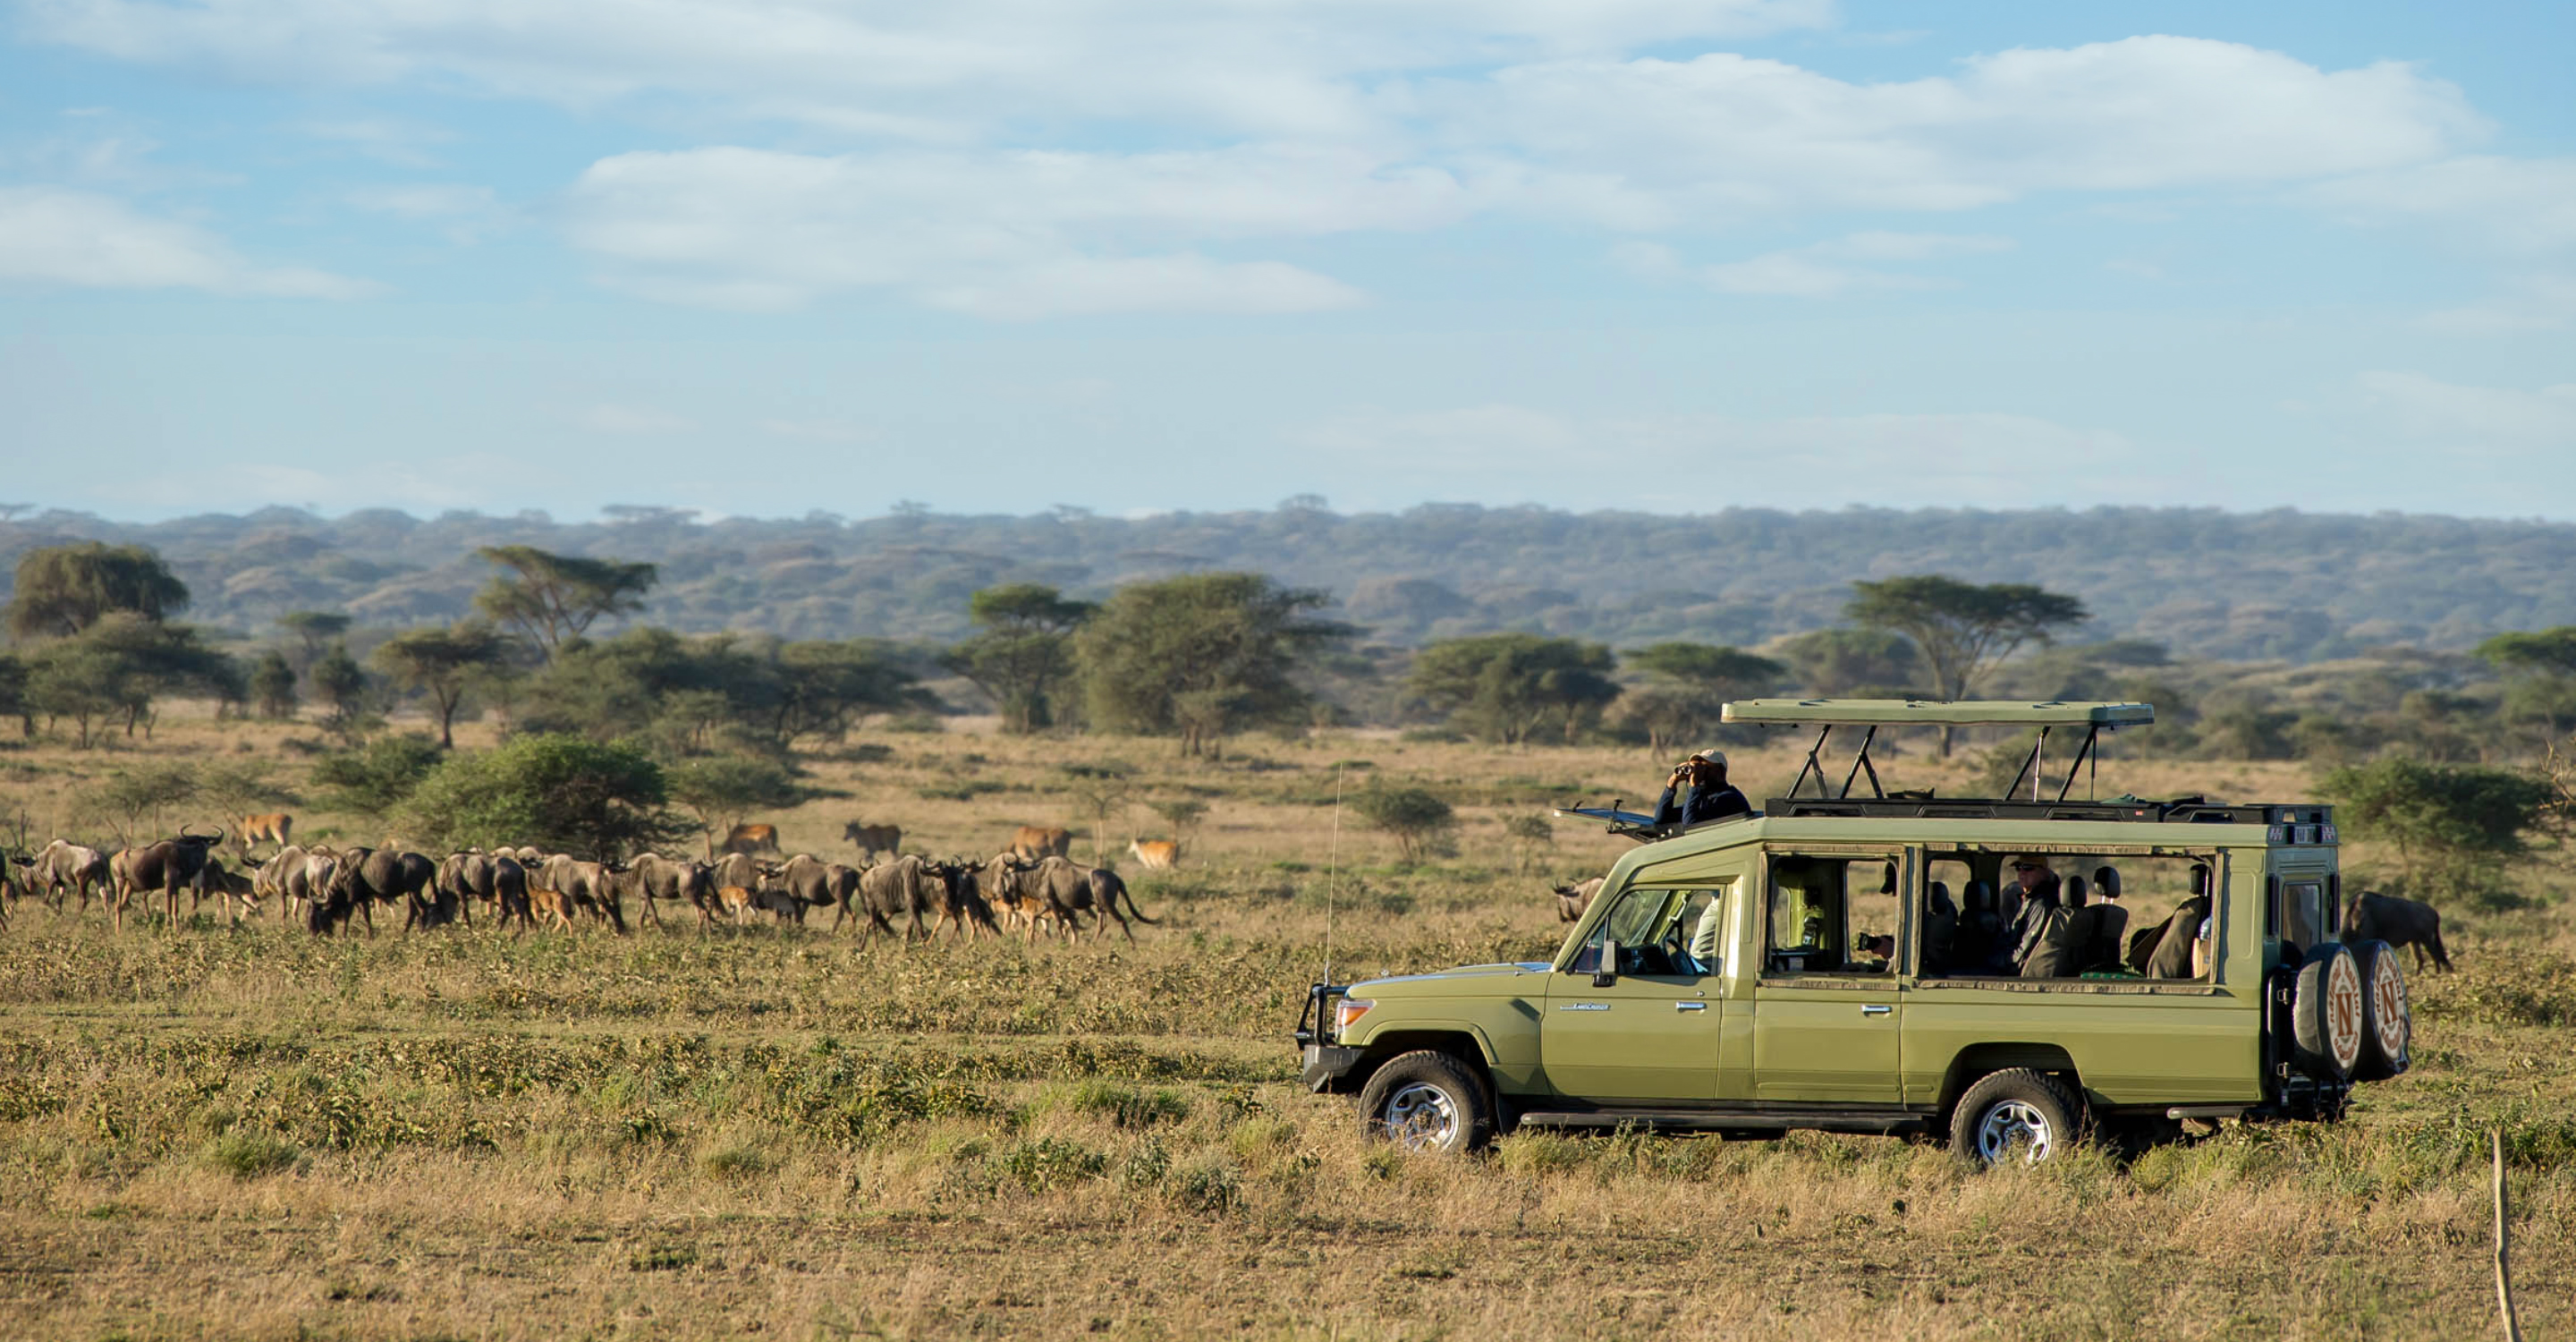 A guide uses binoculars to search for wildlife from the safari vehicle near a heard of wildebeest, Serengeti, Tanzania